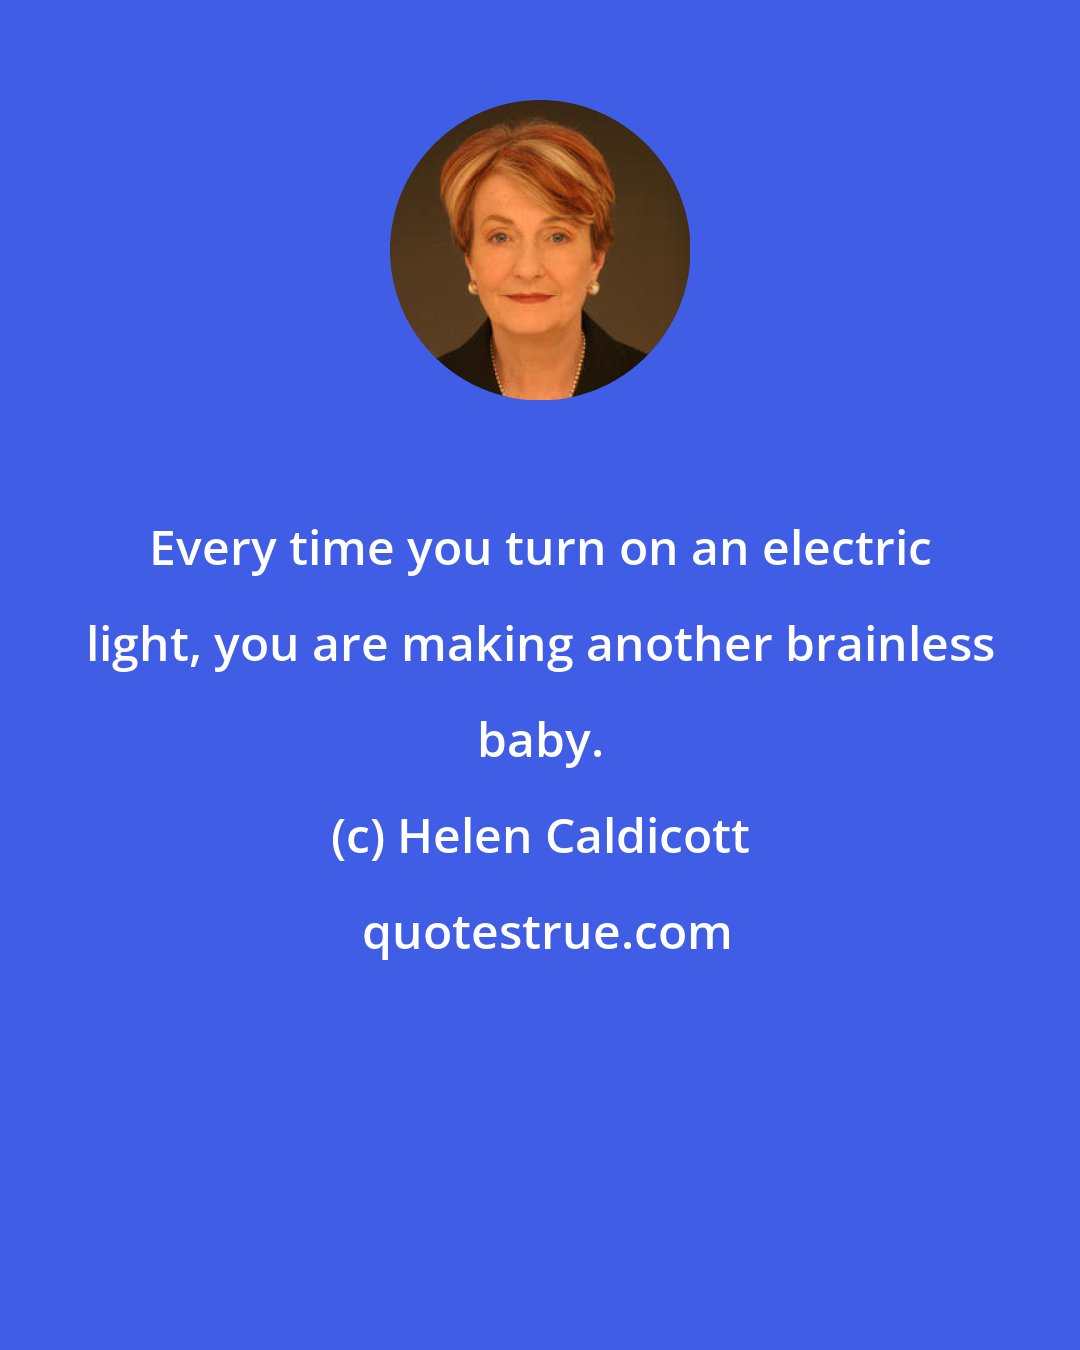 Helen Caldicott: Every time you turn on an electric light, you are making another brainless baby.